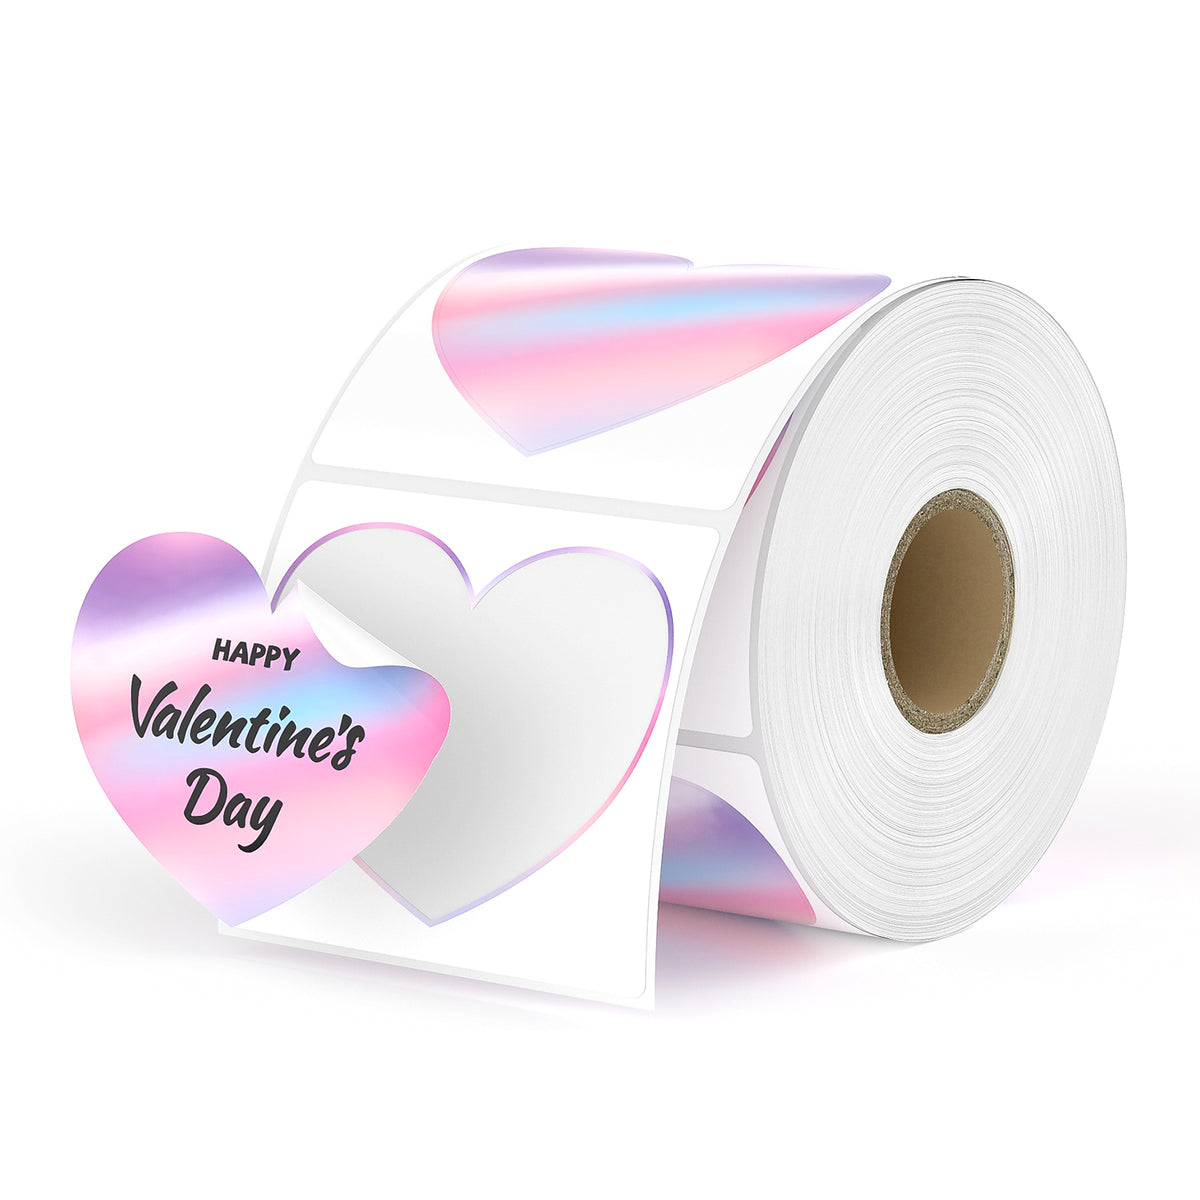 MUNBYN Gradient Heart Shaped Thermal Labels